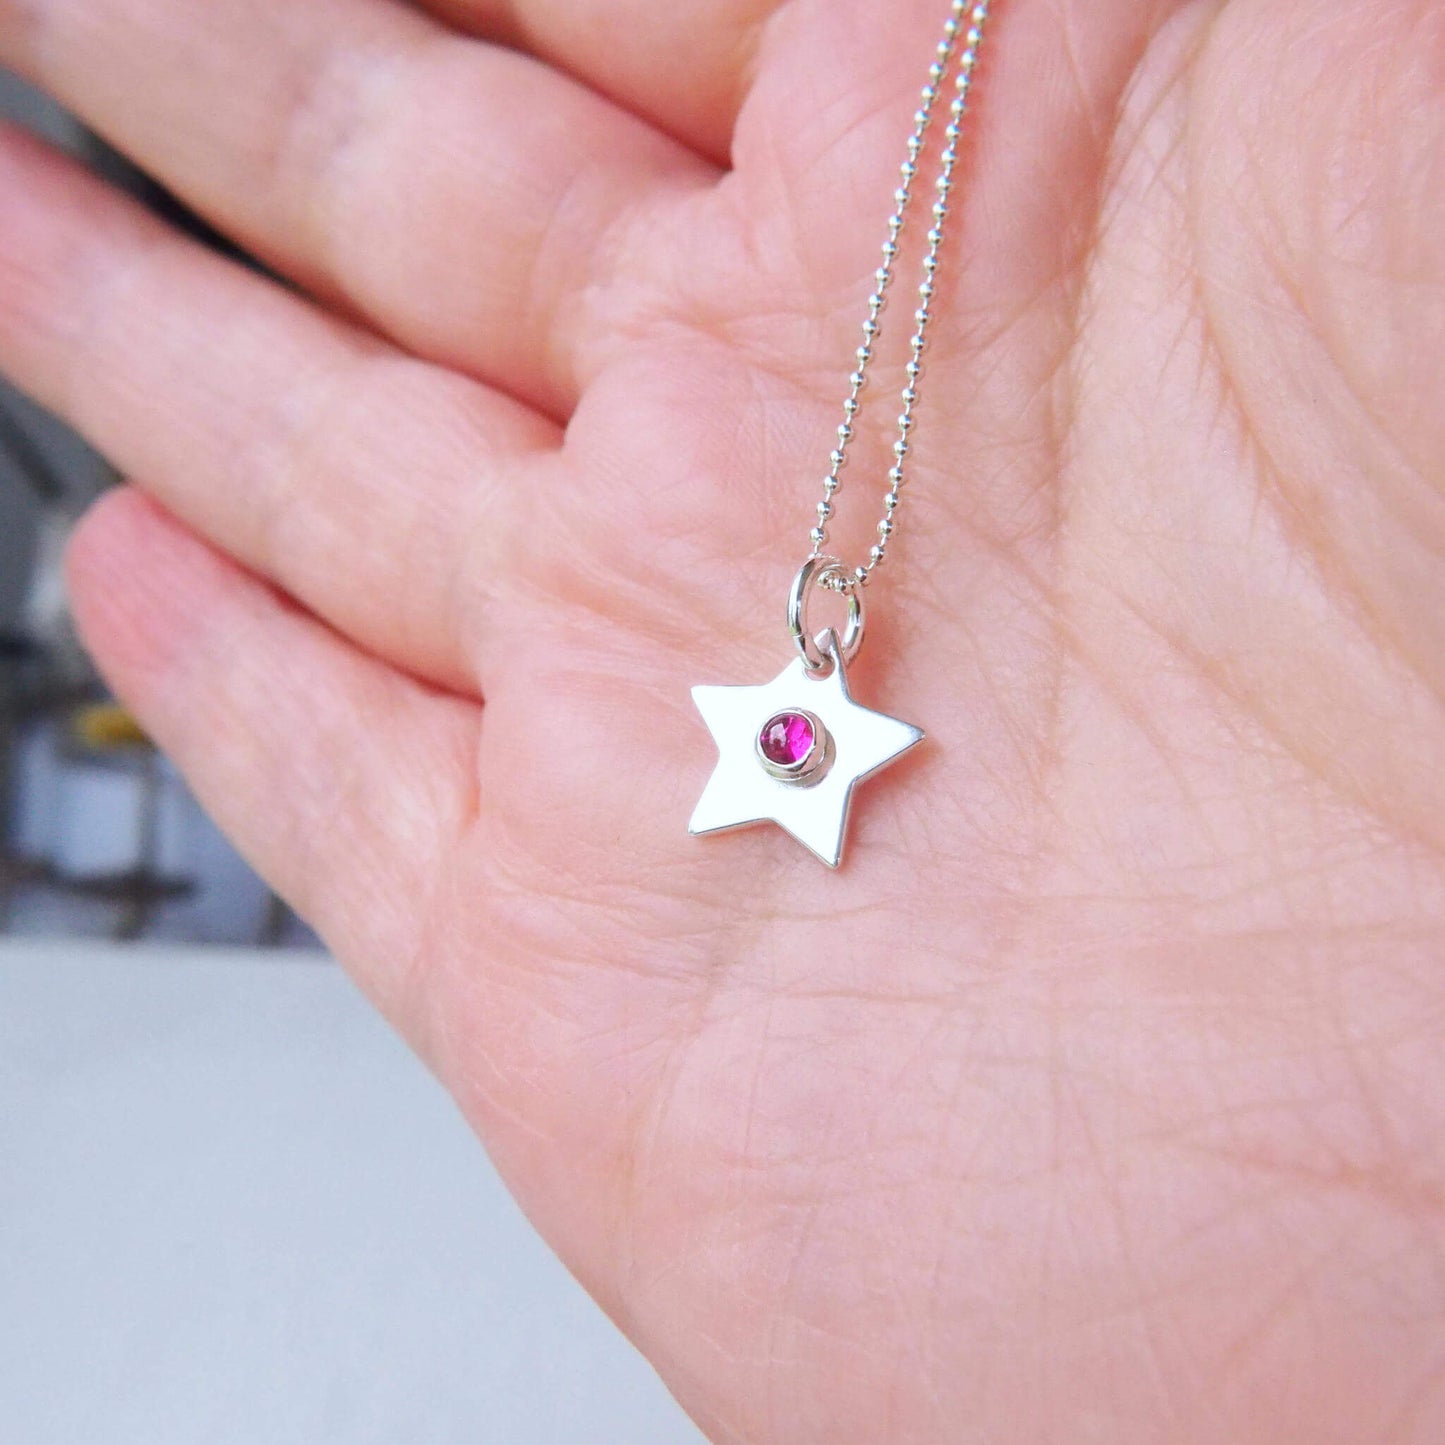 Star Birthstone Charm Necklace with a round 3mm lab ruby cabochon centre. Measuring 12mm in size so is small enough for children as well as adults and is available in a range of other birthstones too. It is Sterling Silver and comes with a choice of chain design and length.The gemstone is Lab Ruby, Birthstone for July. Handmade in Scotland by Maram Jewellery